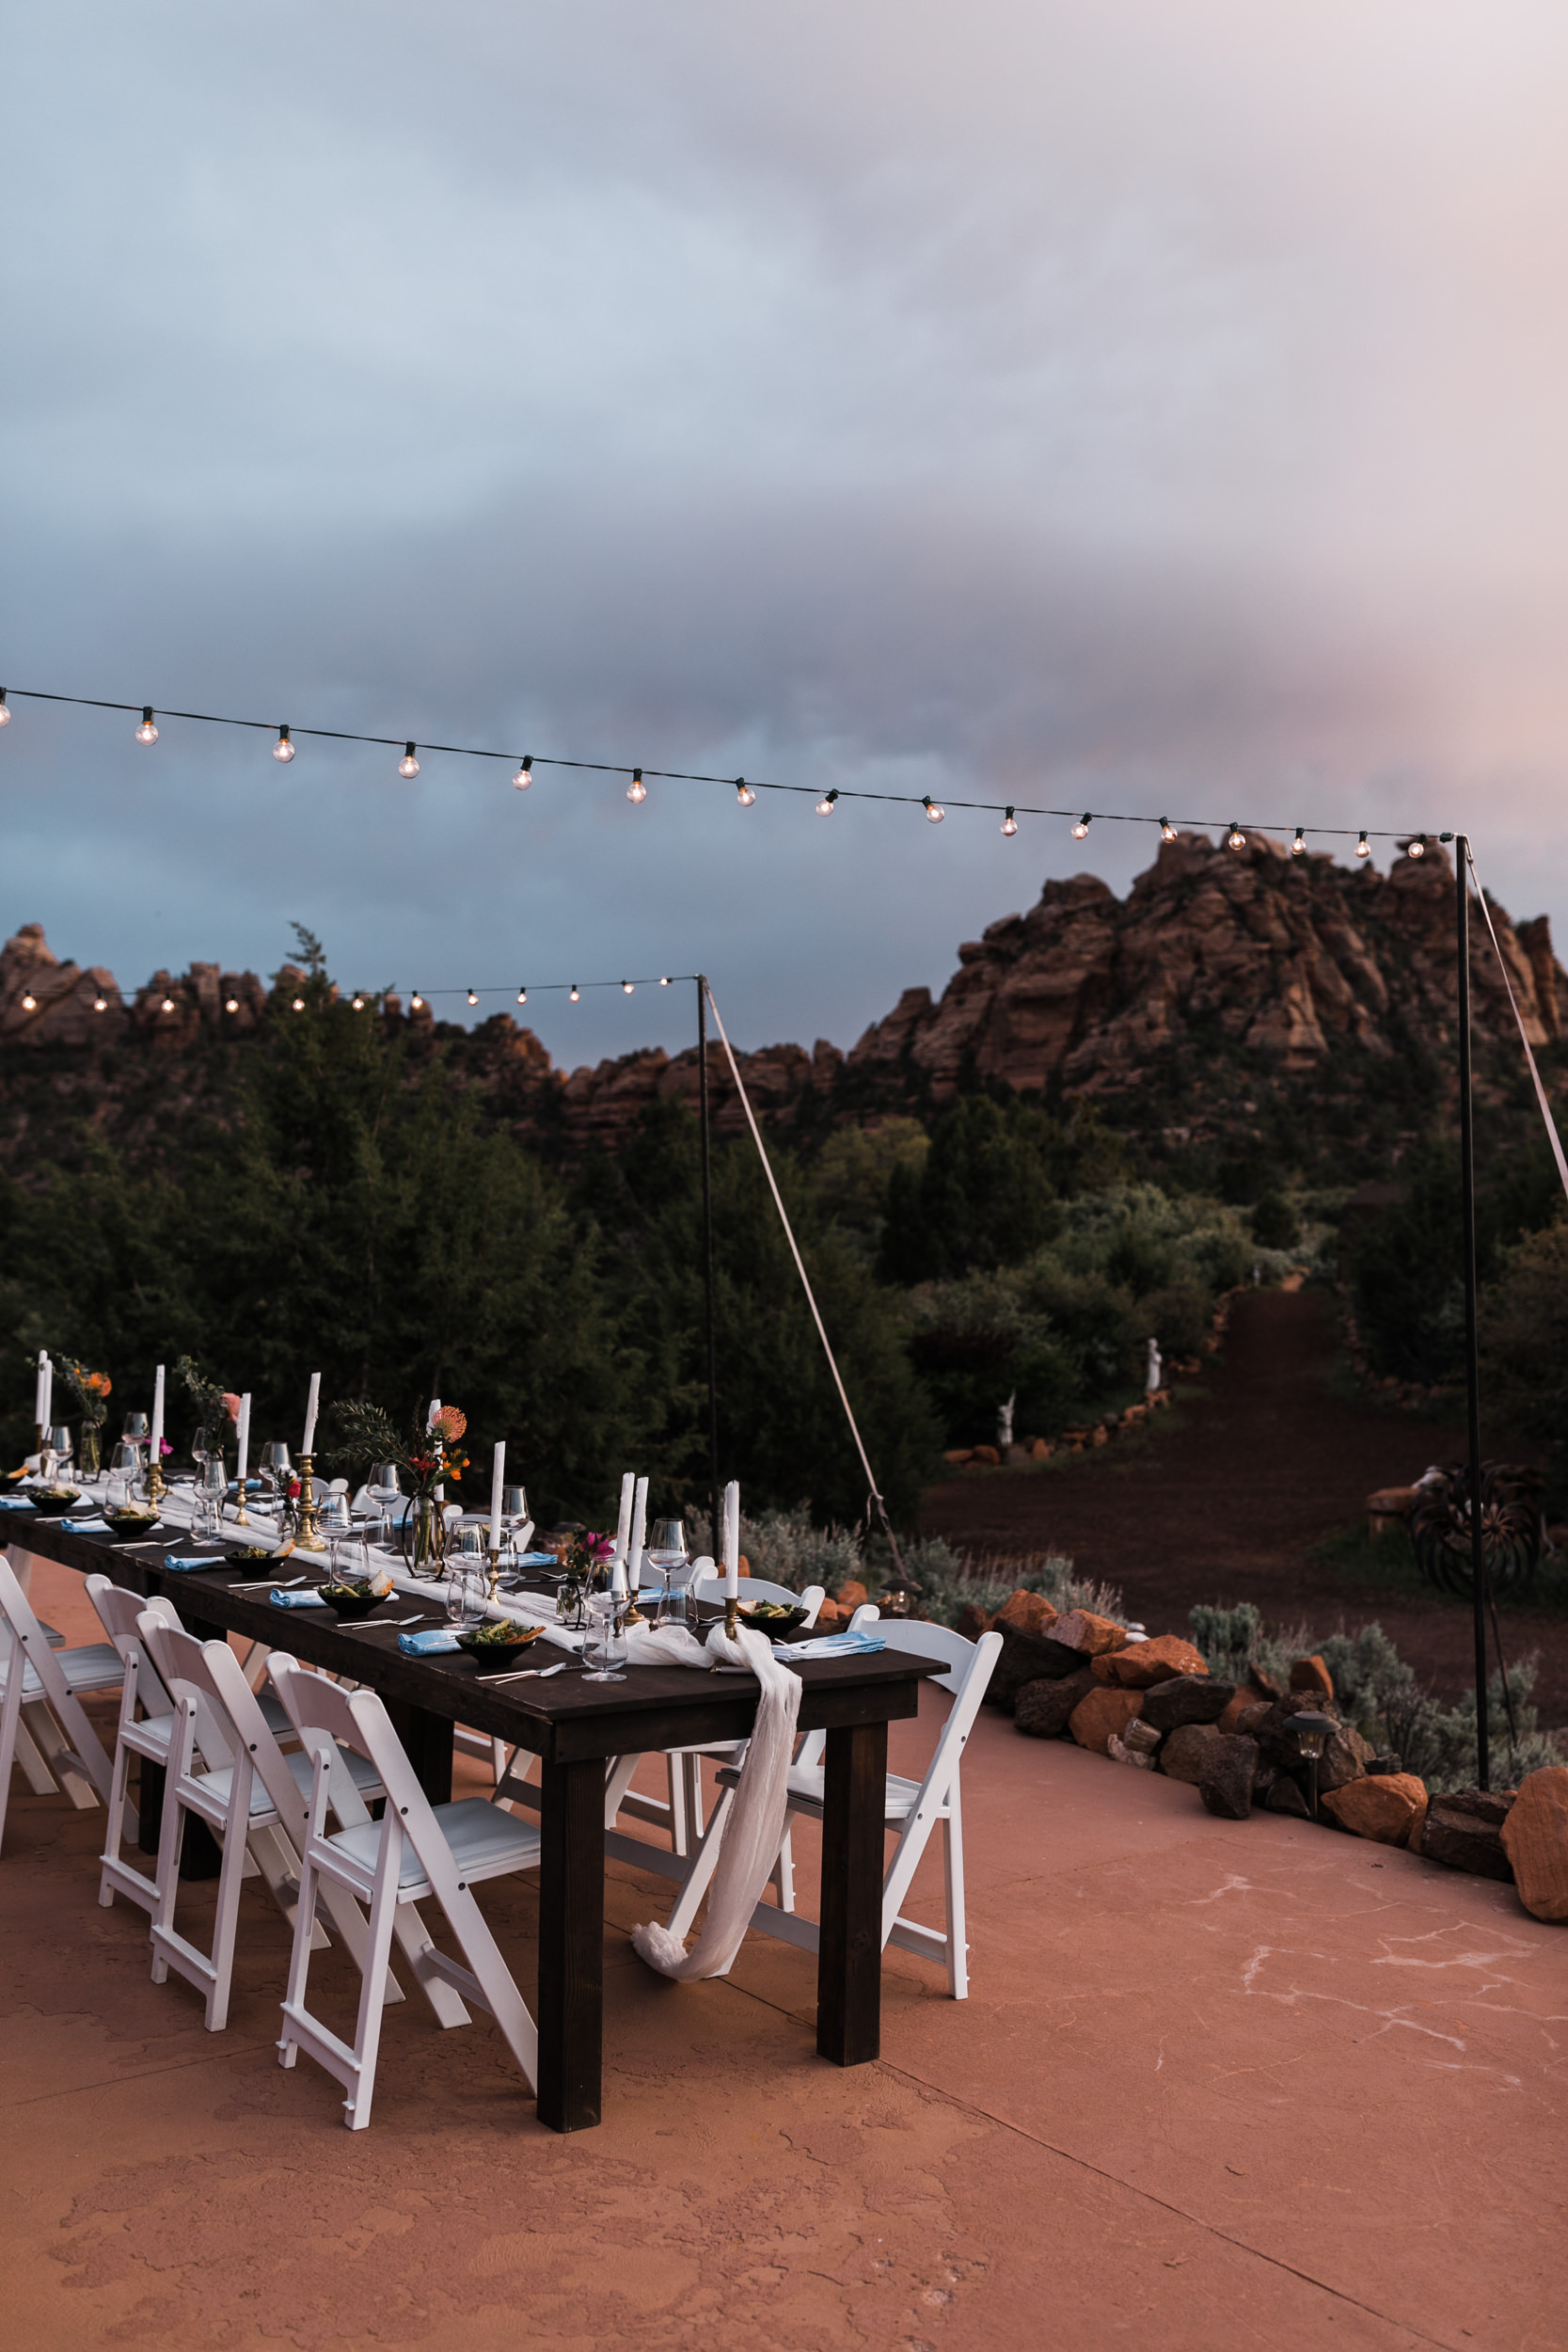 Zion national park elopement photographer | styled small wedding dinner in the desert | the hearnes adventure photography